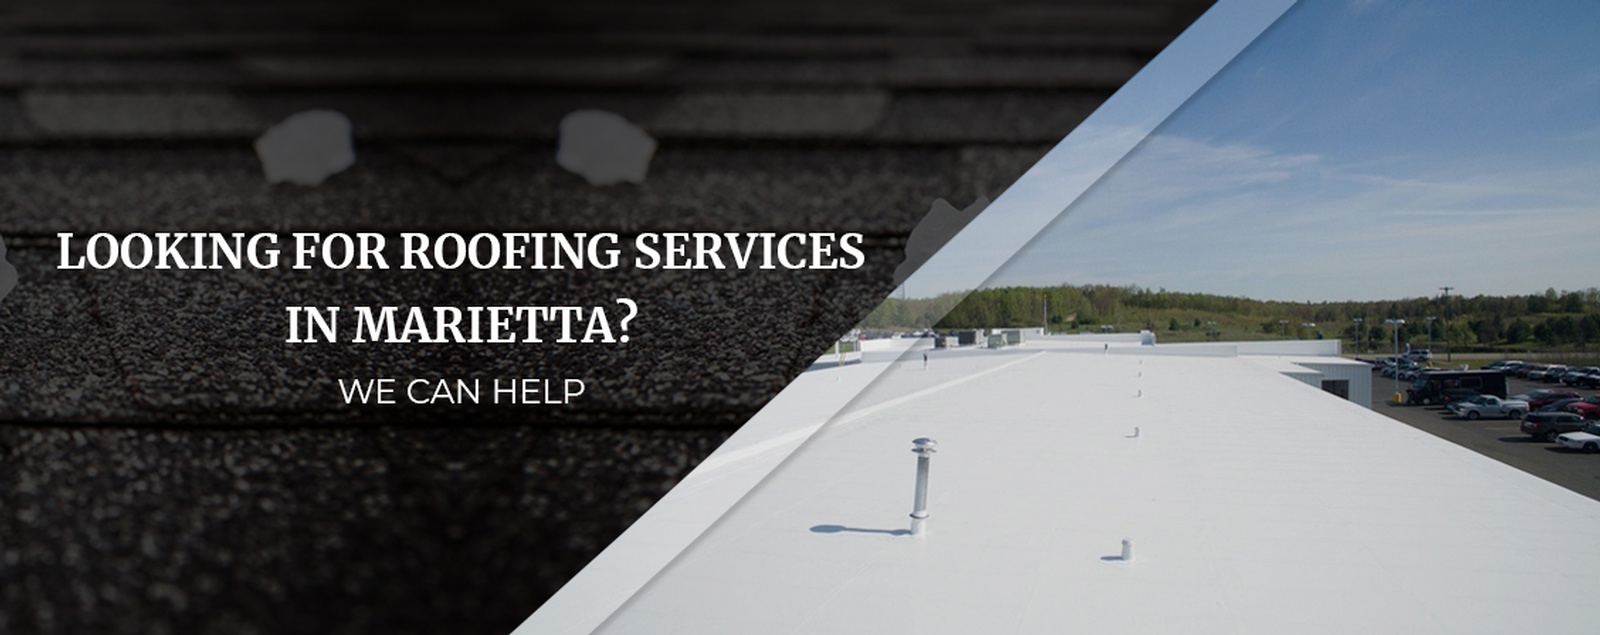 Looking For Roofing Services In Marietta We Can Help